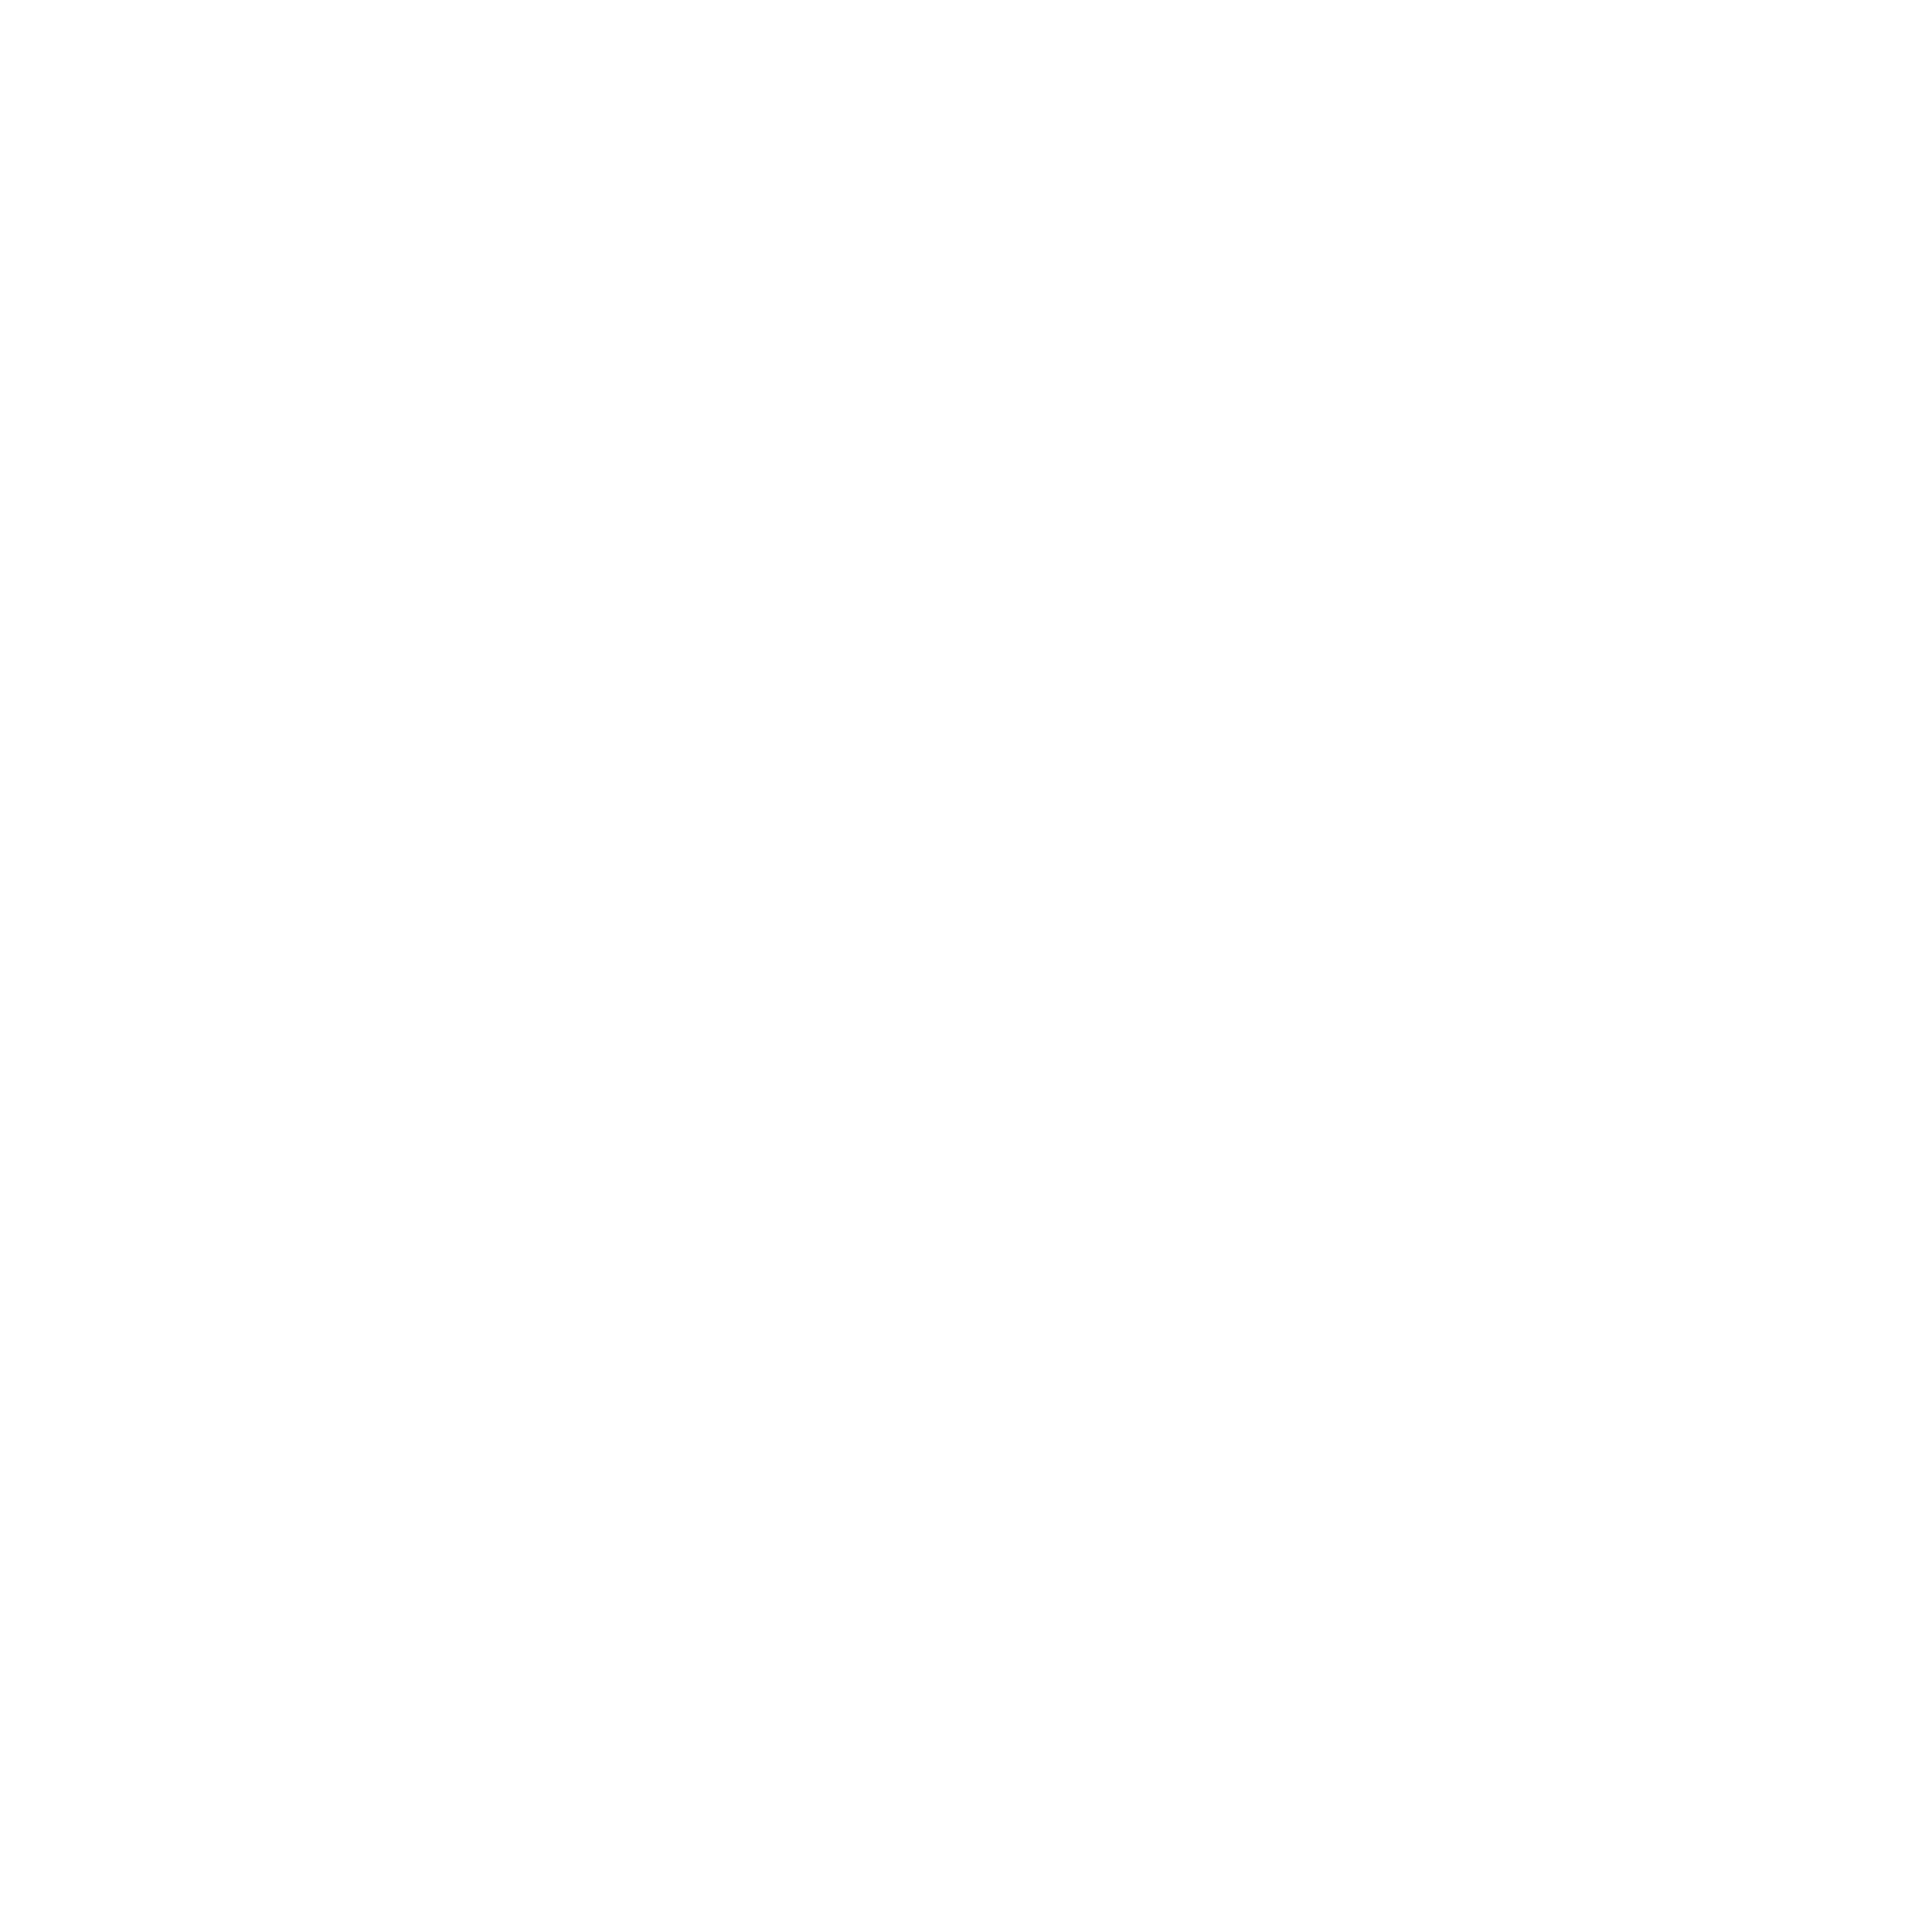 Smart Homes, New Homes